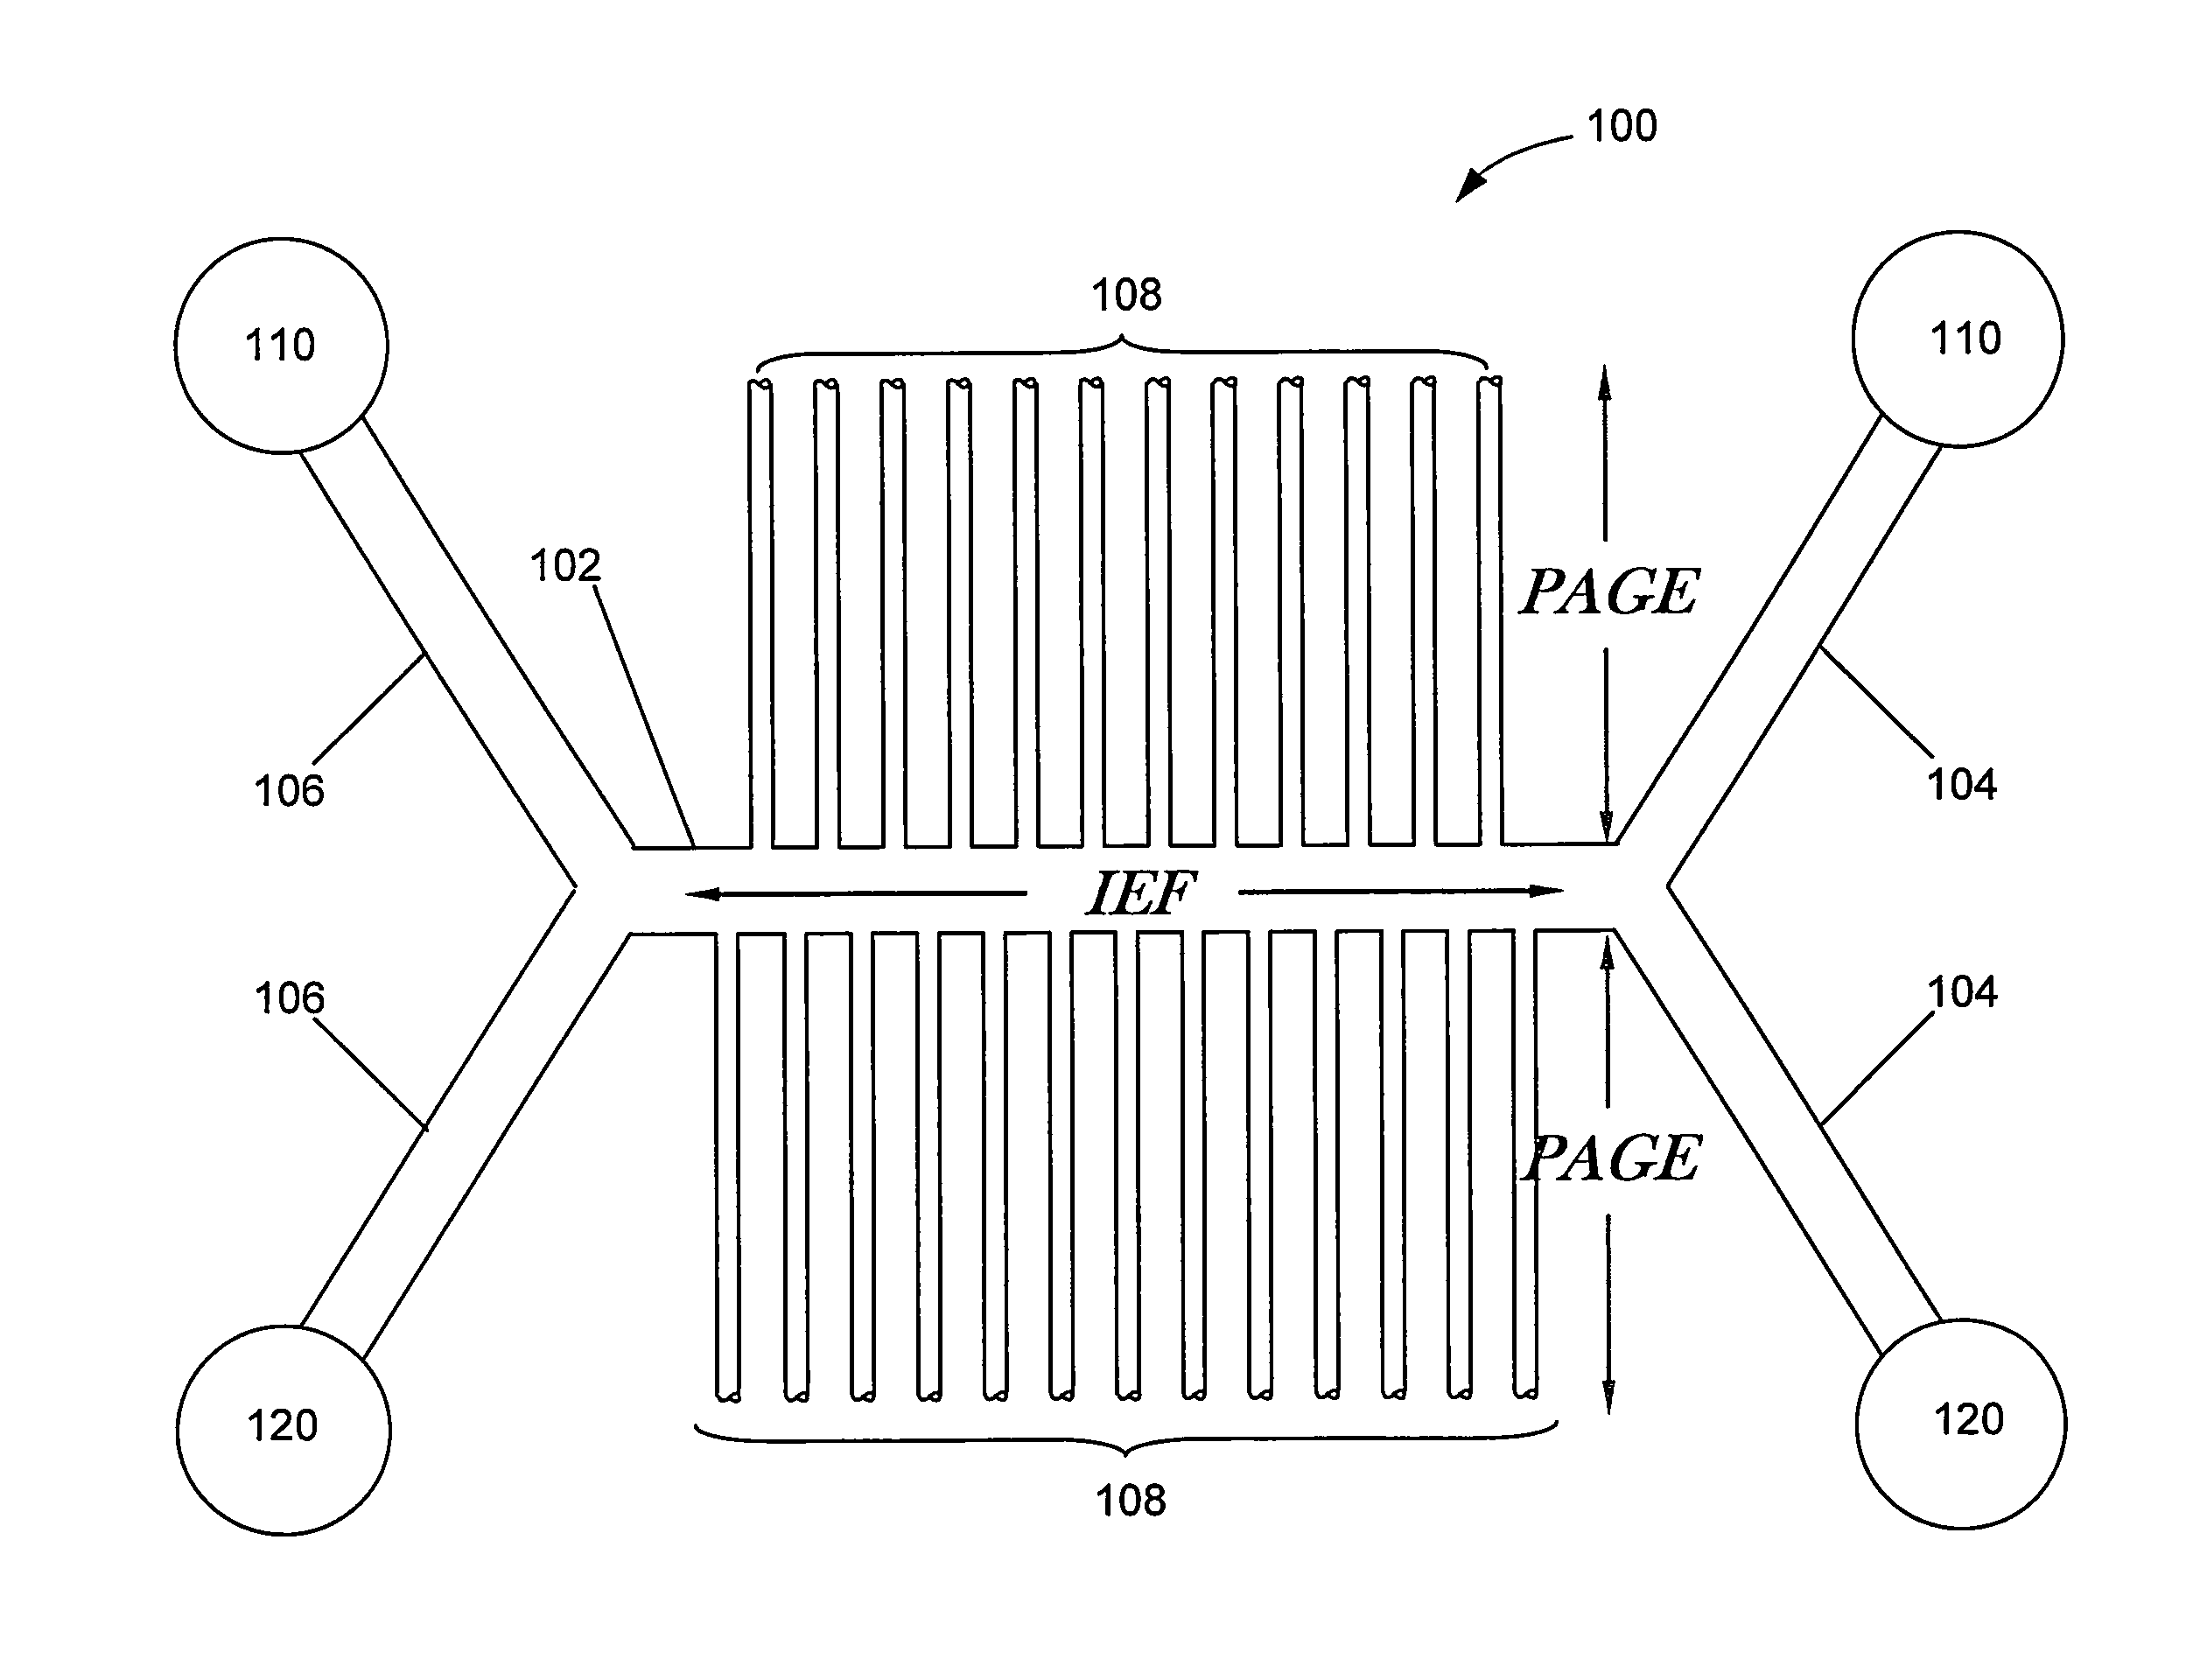 Microfluidic device having an immobilized pH gradient and page gels for protein separation and analysis